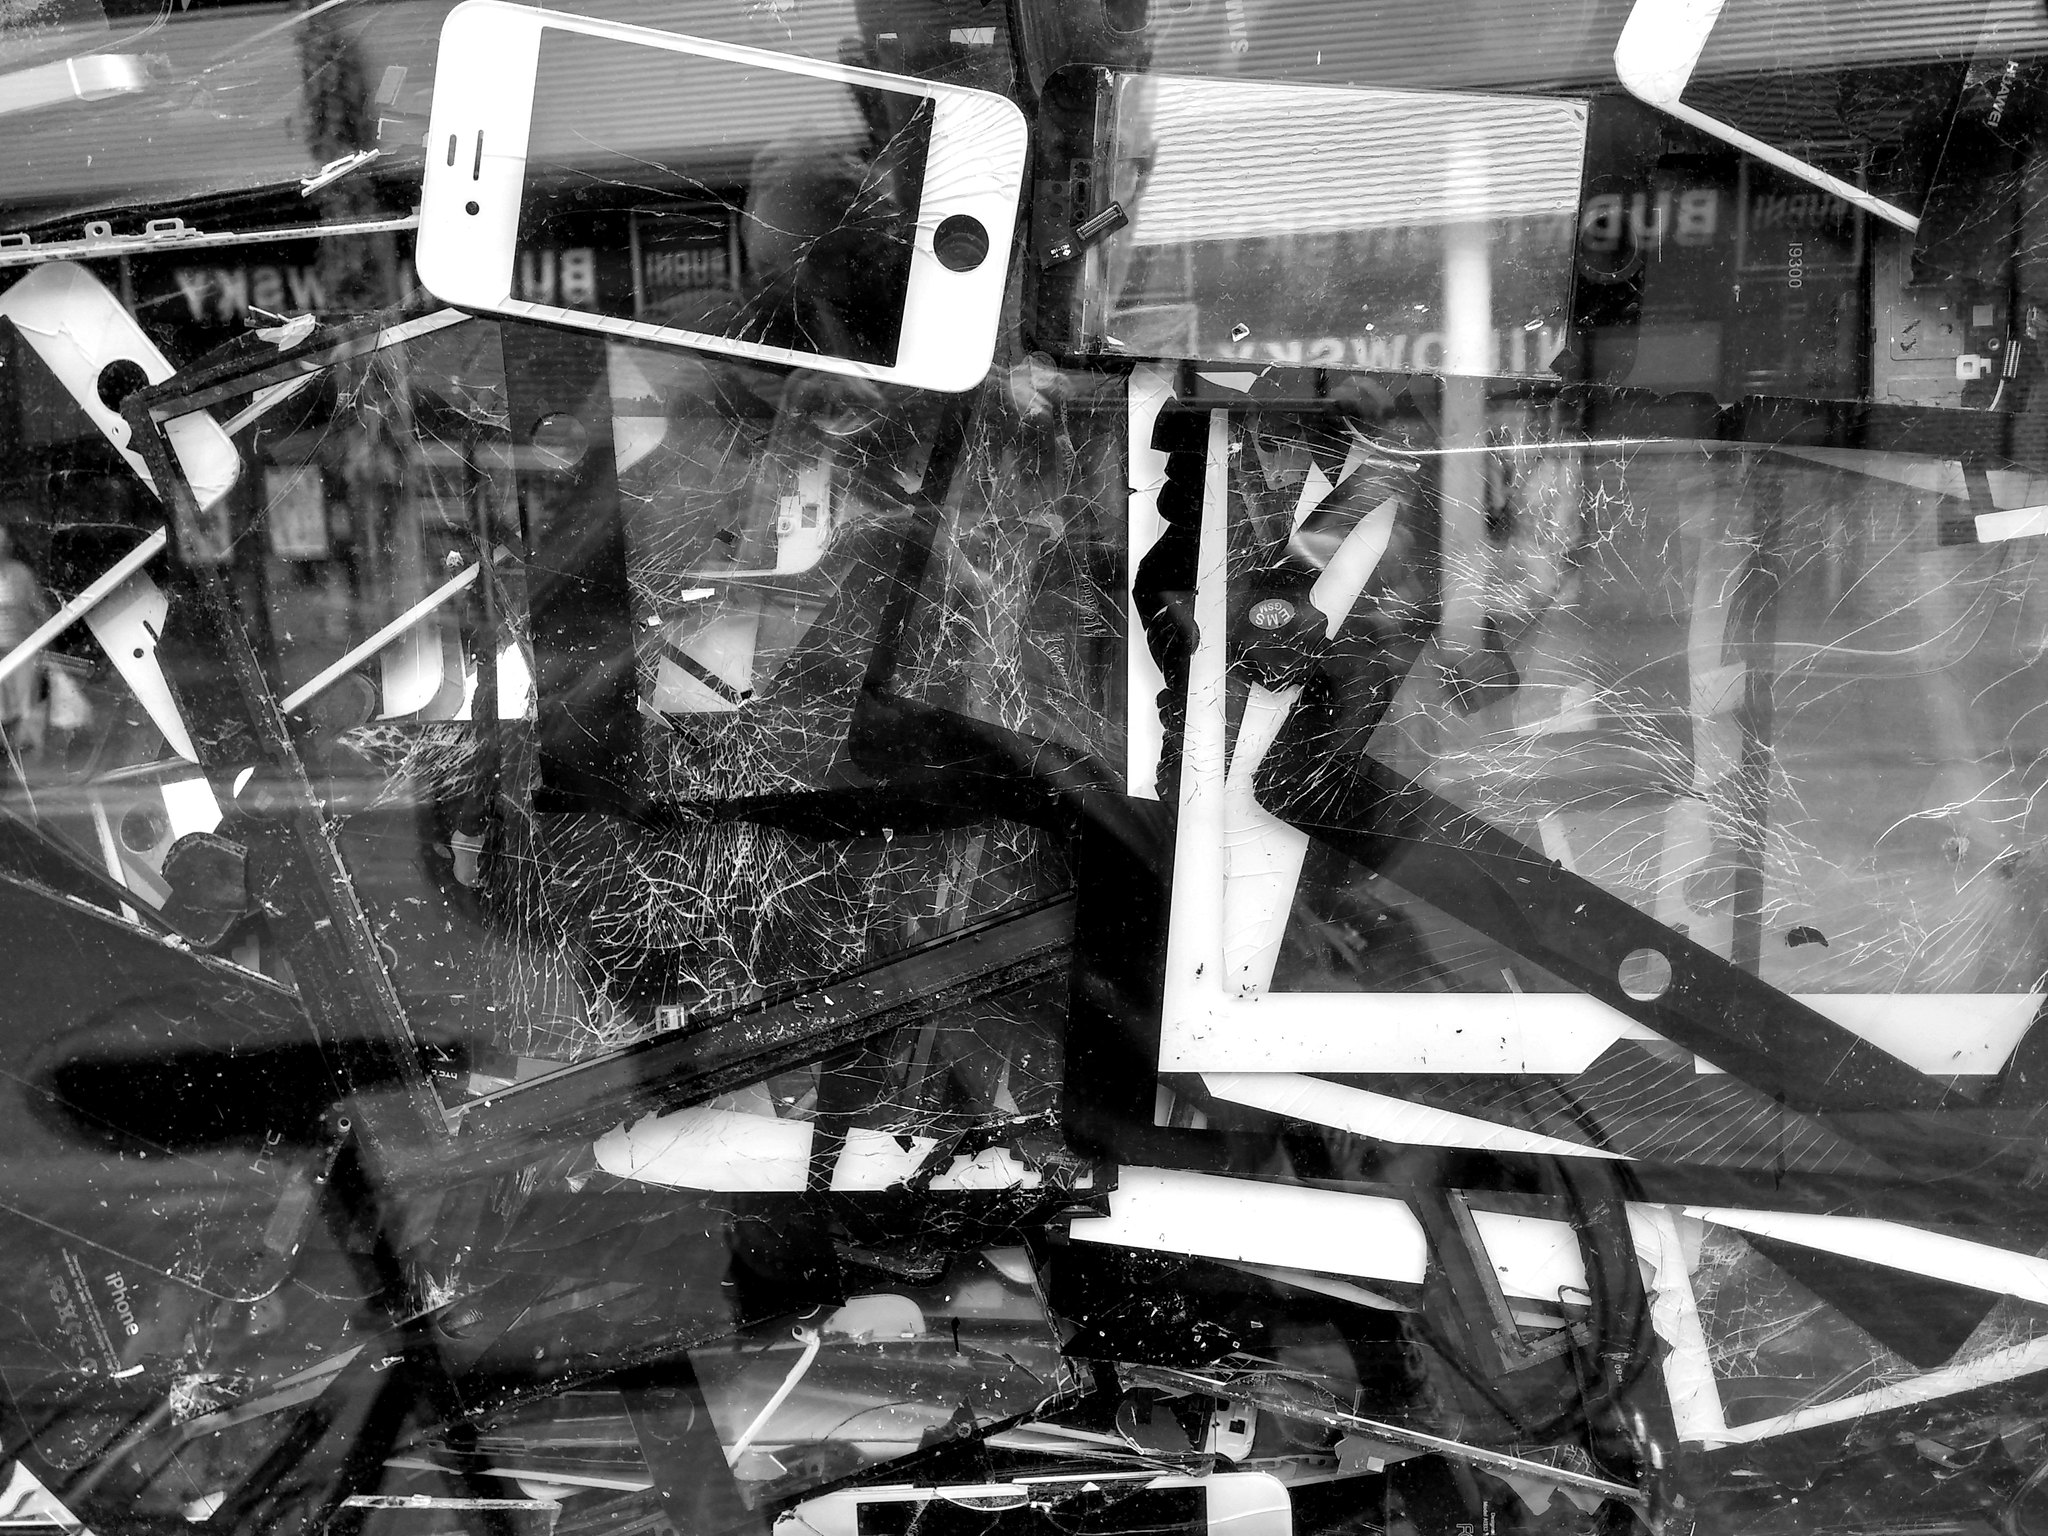 200503 - Broken a pile of broken smartphone and tablet souchscreens by Frerk Meyer CC BY-SA 2.0 - La Déviation